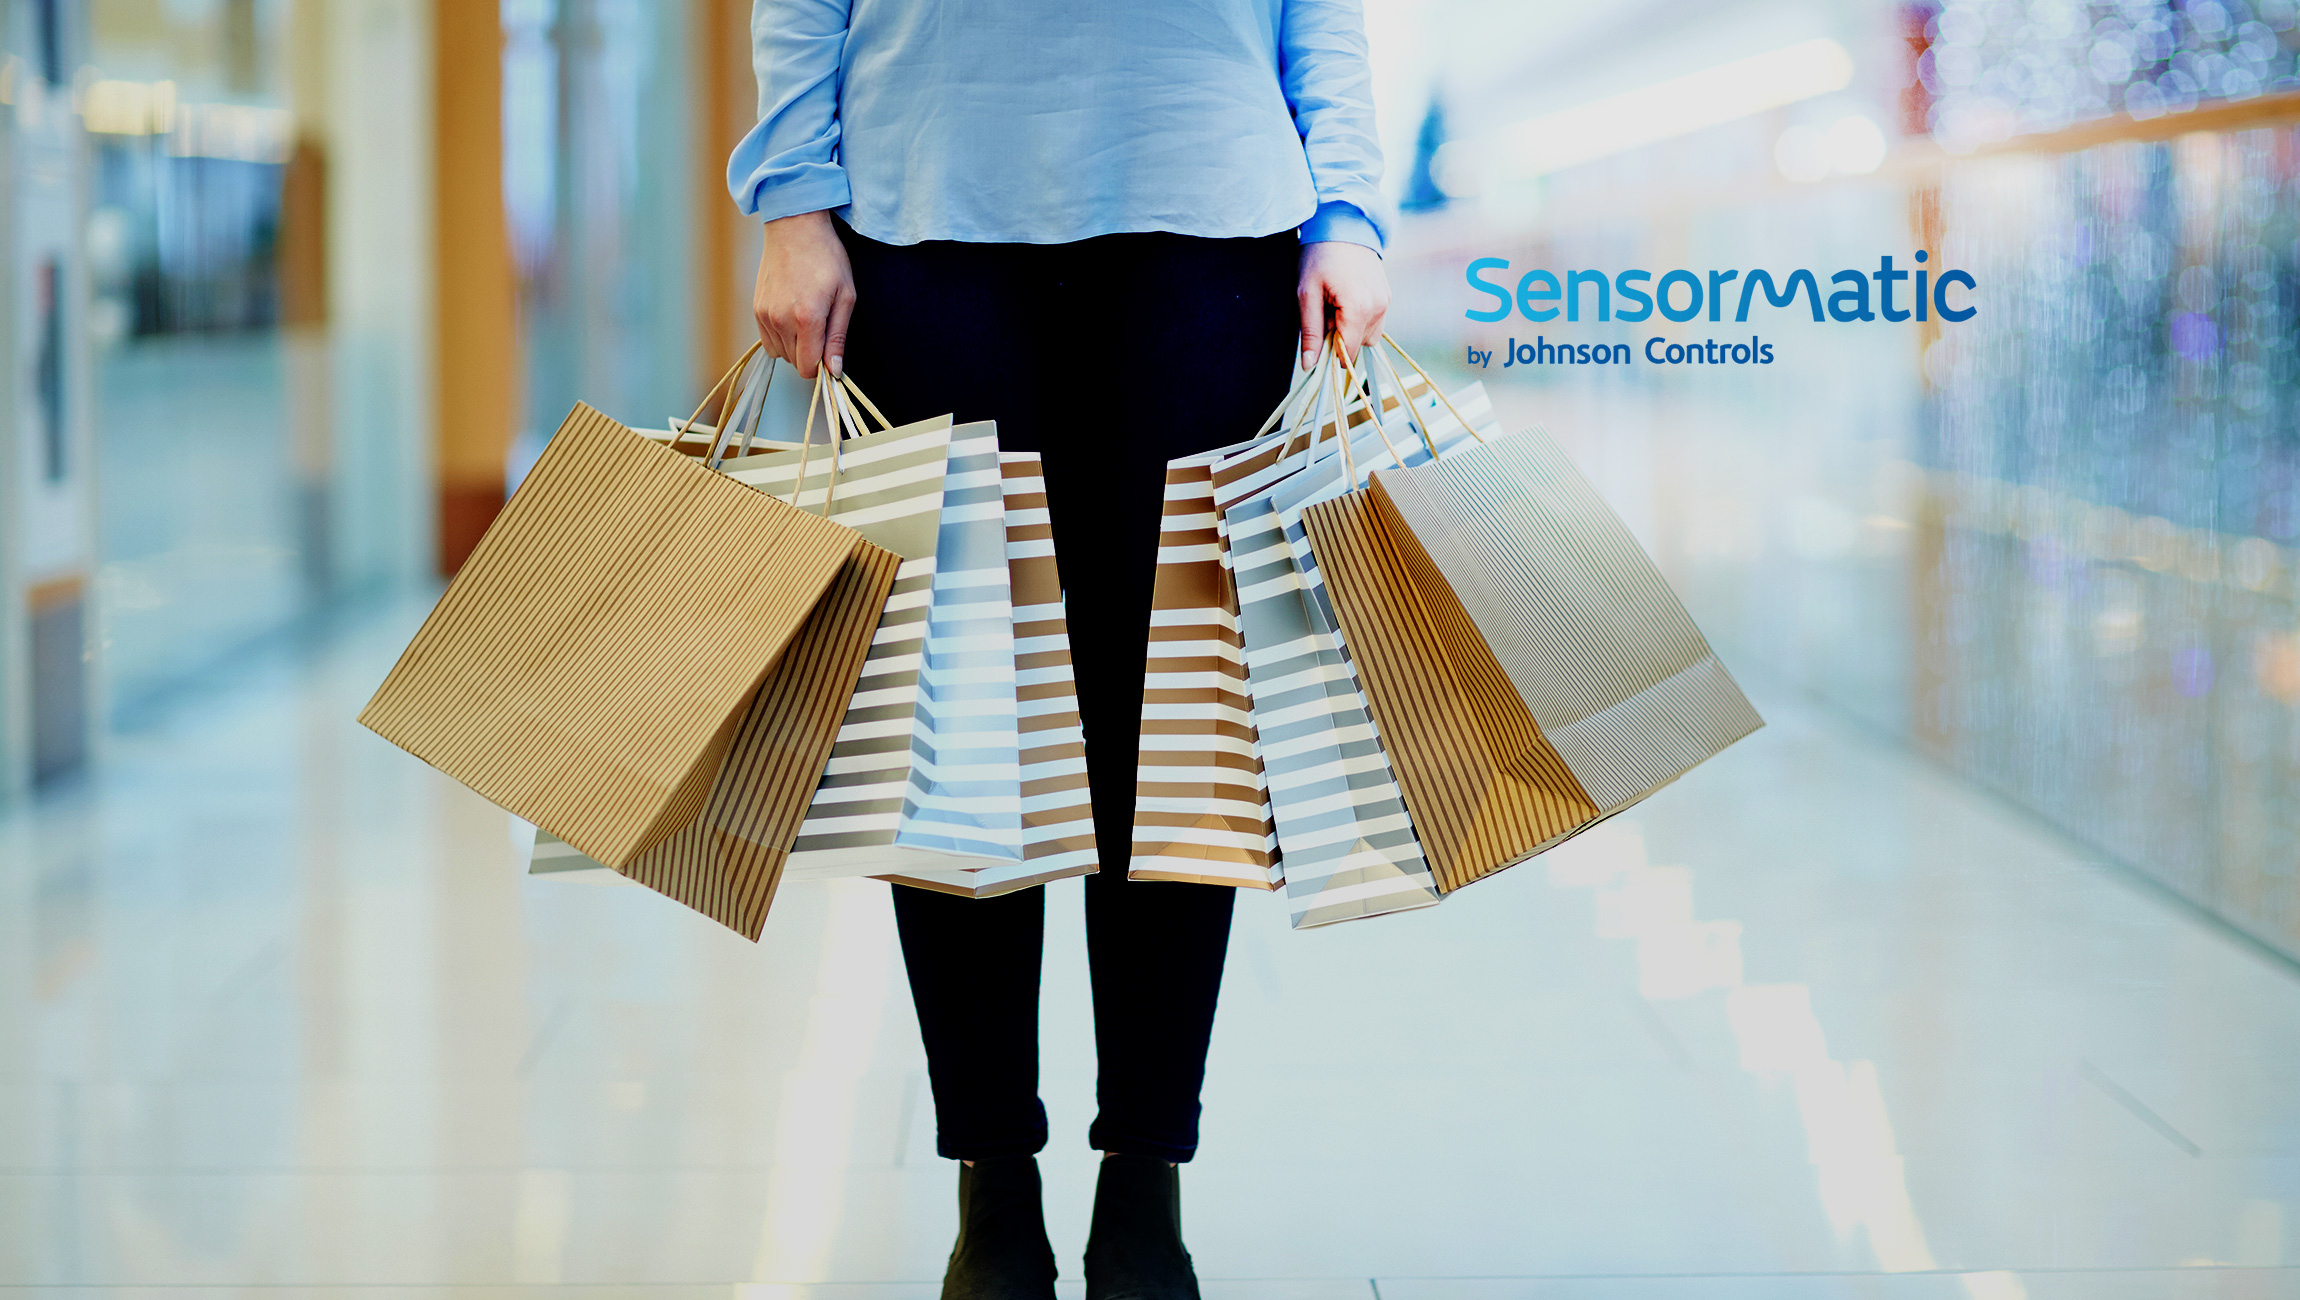 Mall of America Utilizes the Sensormatic Solutions ShopperTrak Offering to Accurately Measure Mall Traffic